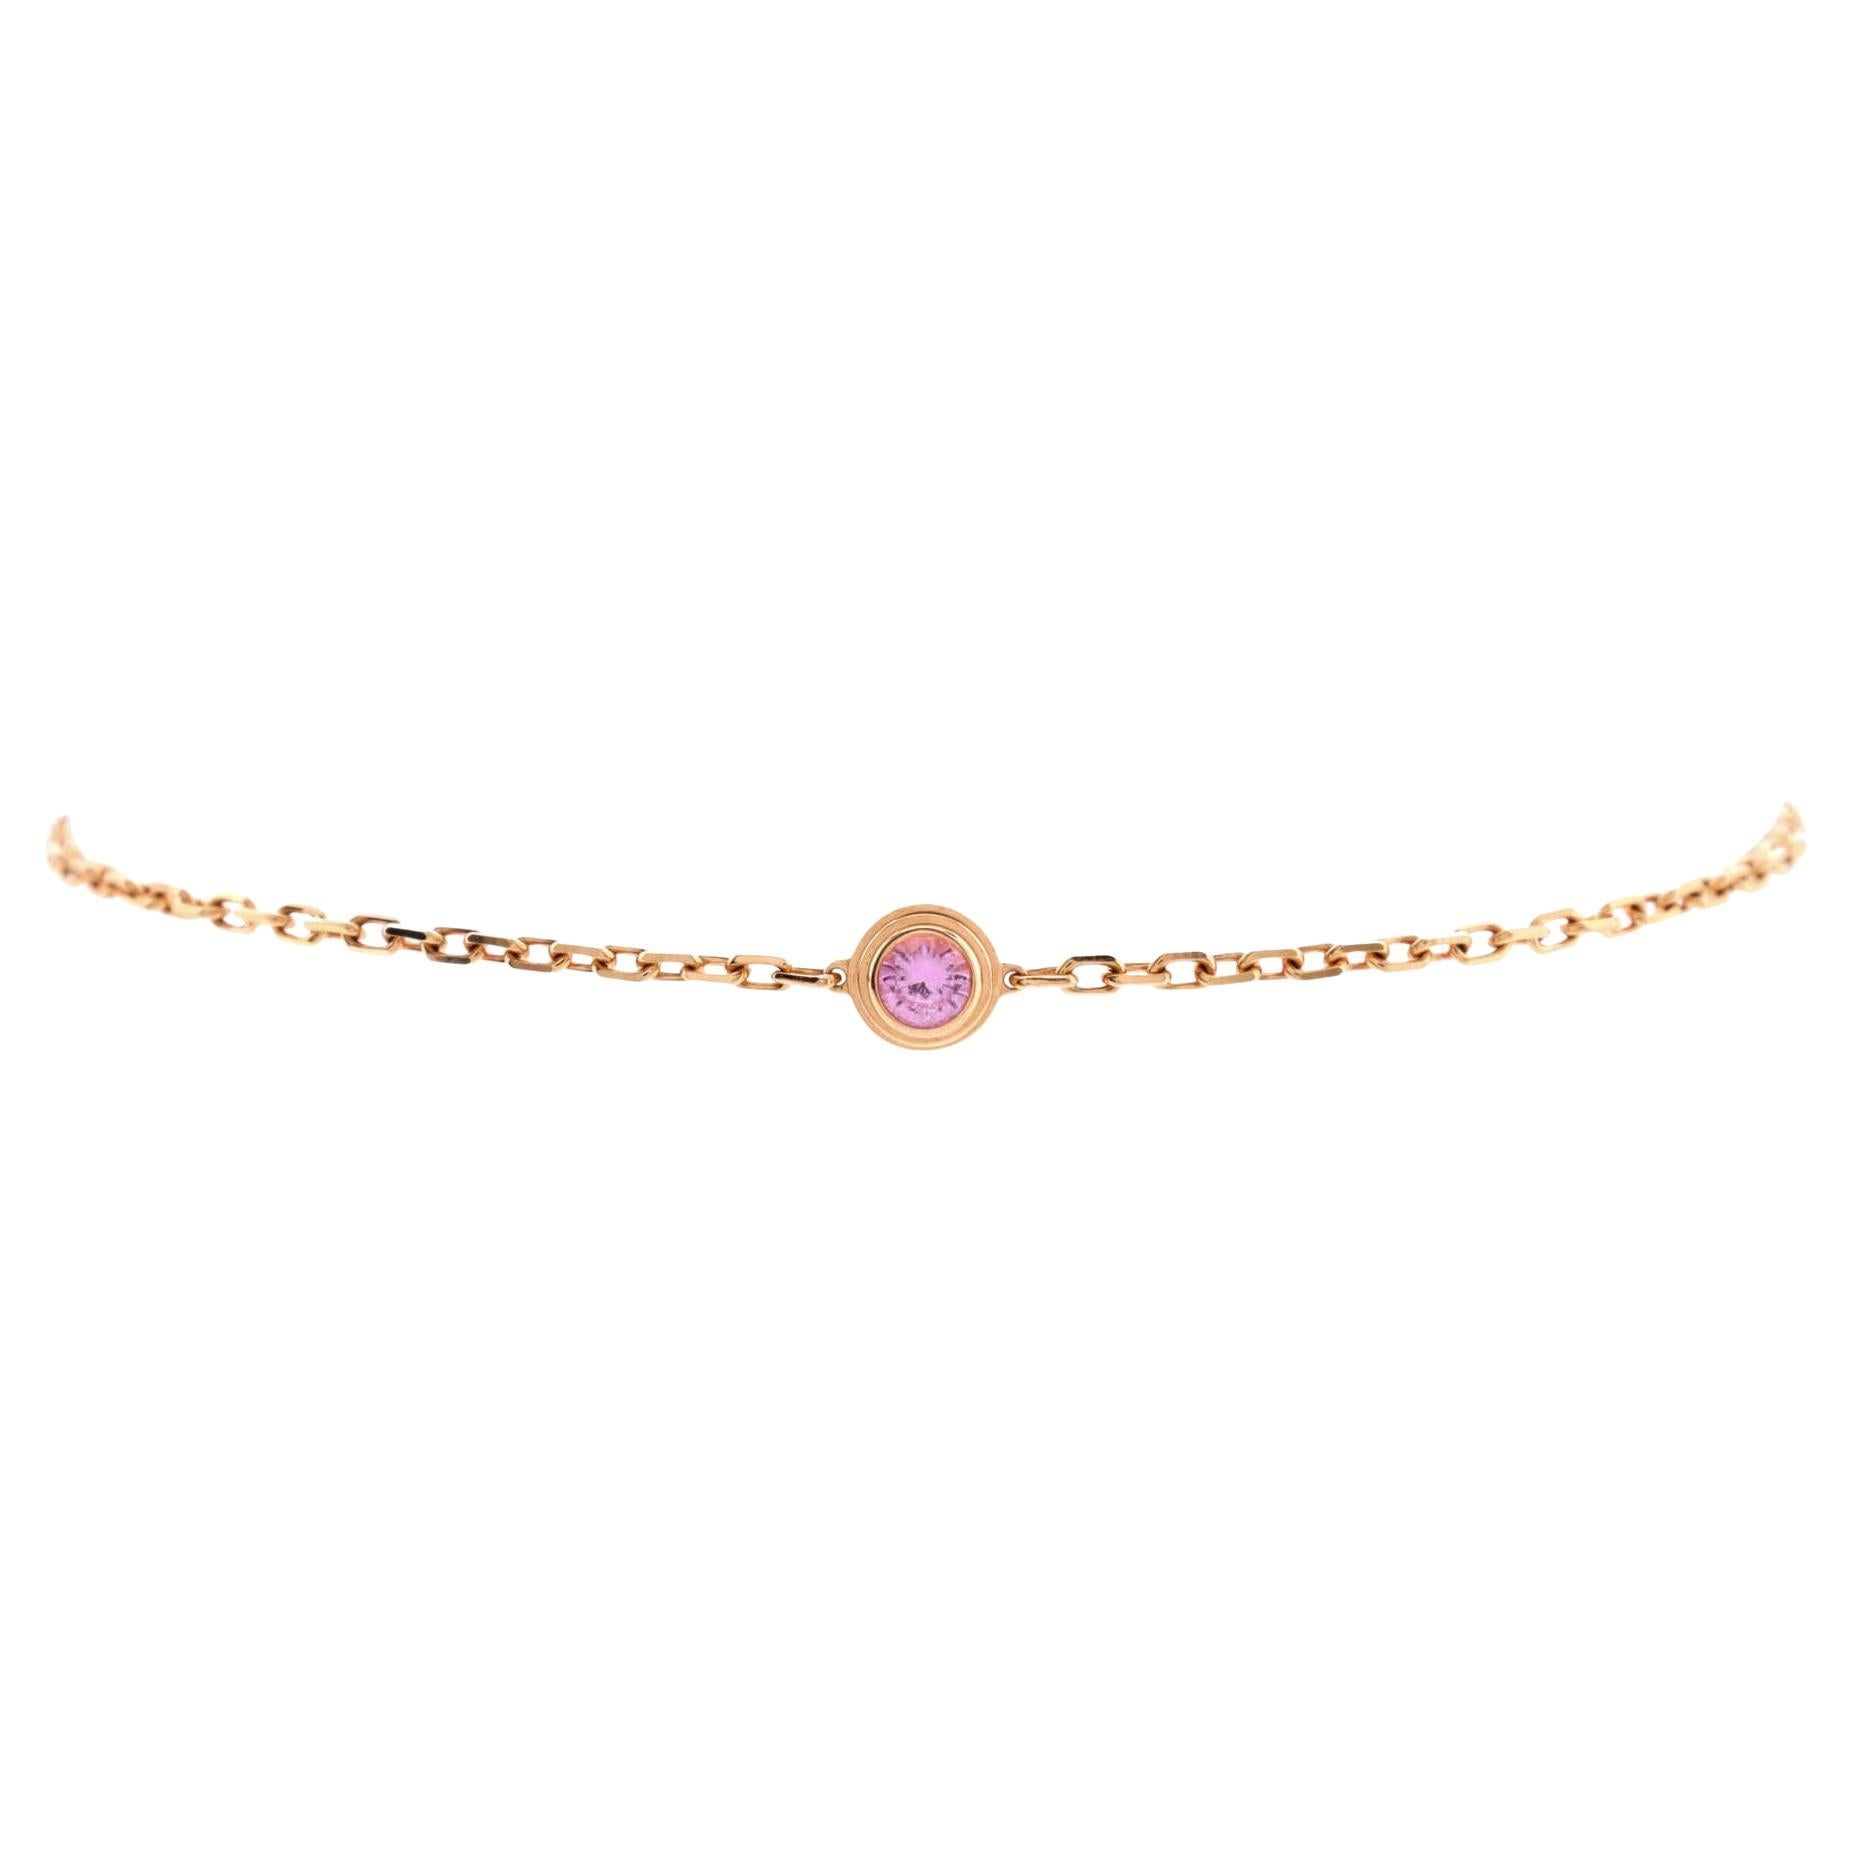 Cartier D'Amour Bracelet 18K Rose Gold with Pink Sapphire